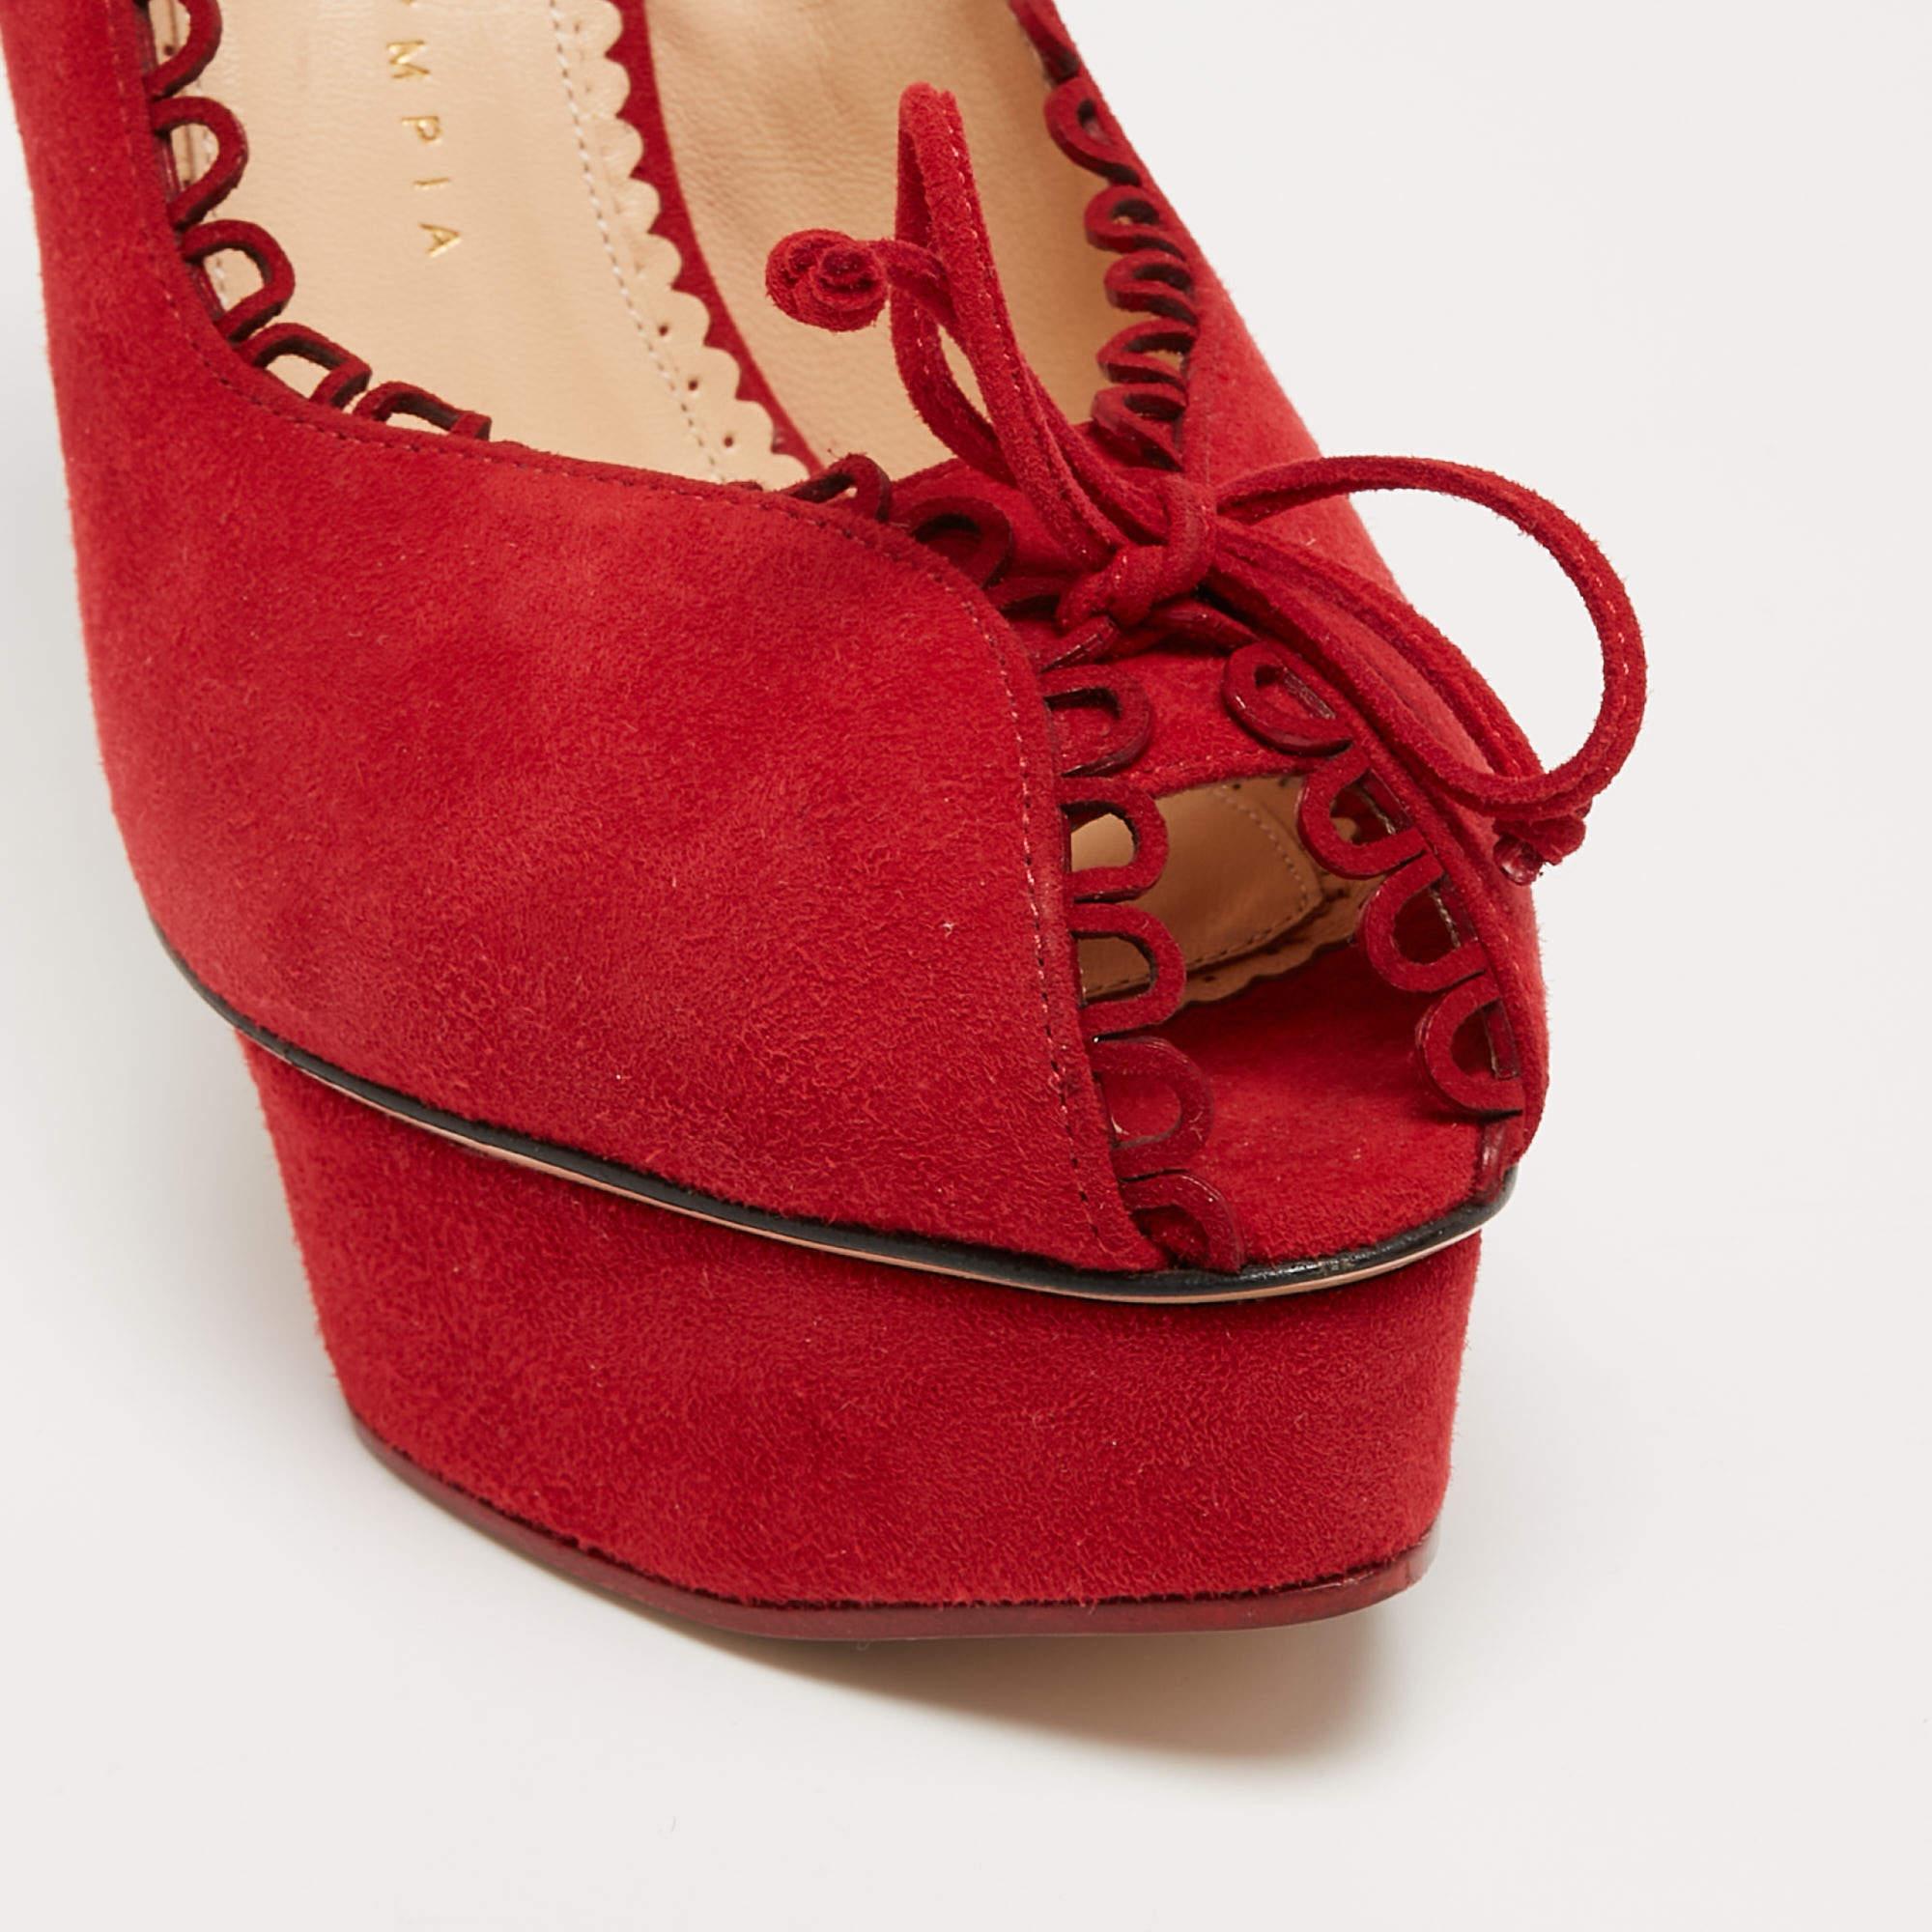 Charlotte Olympia Red Suede Daphne Scalloped Trim Peep ToePumps Size 40.5 For Sale 1